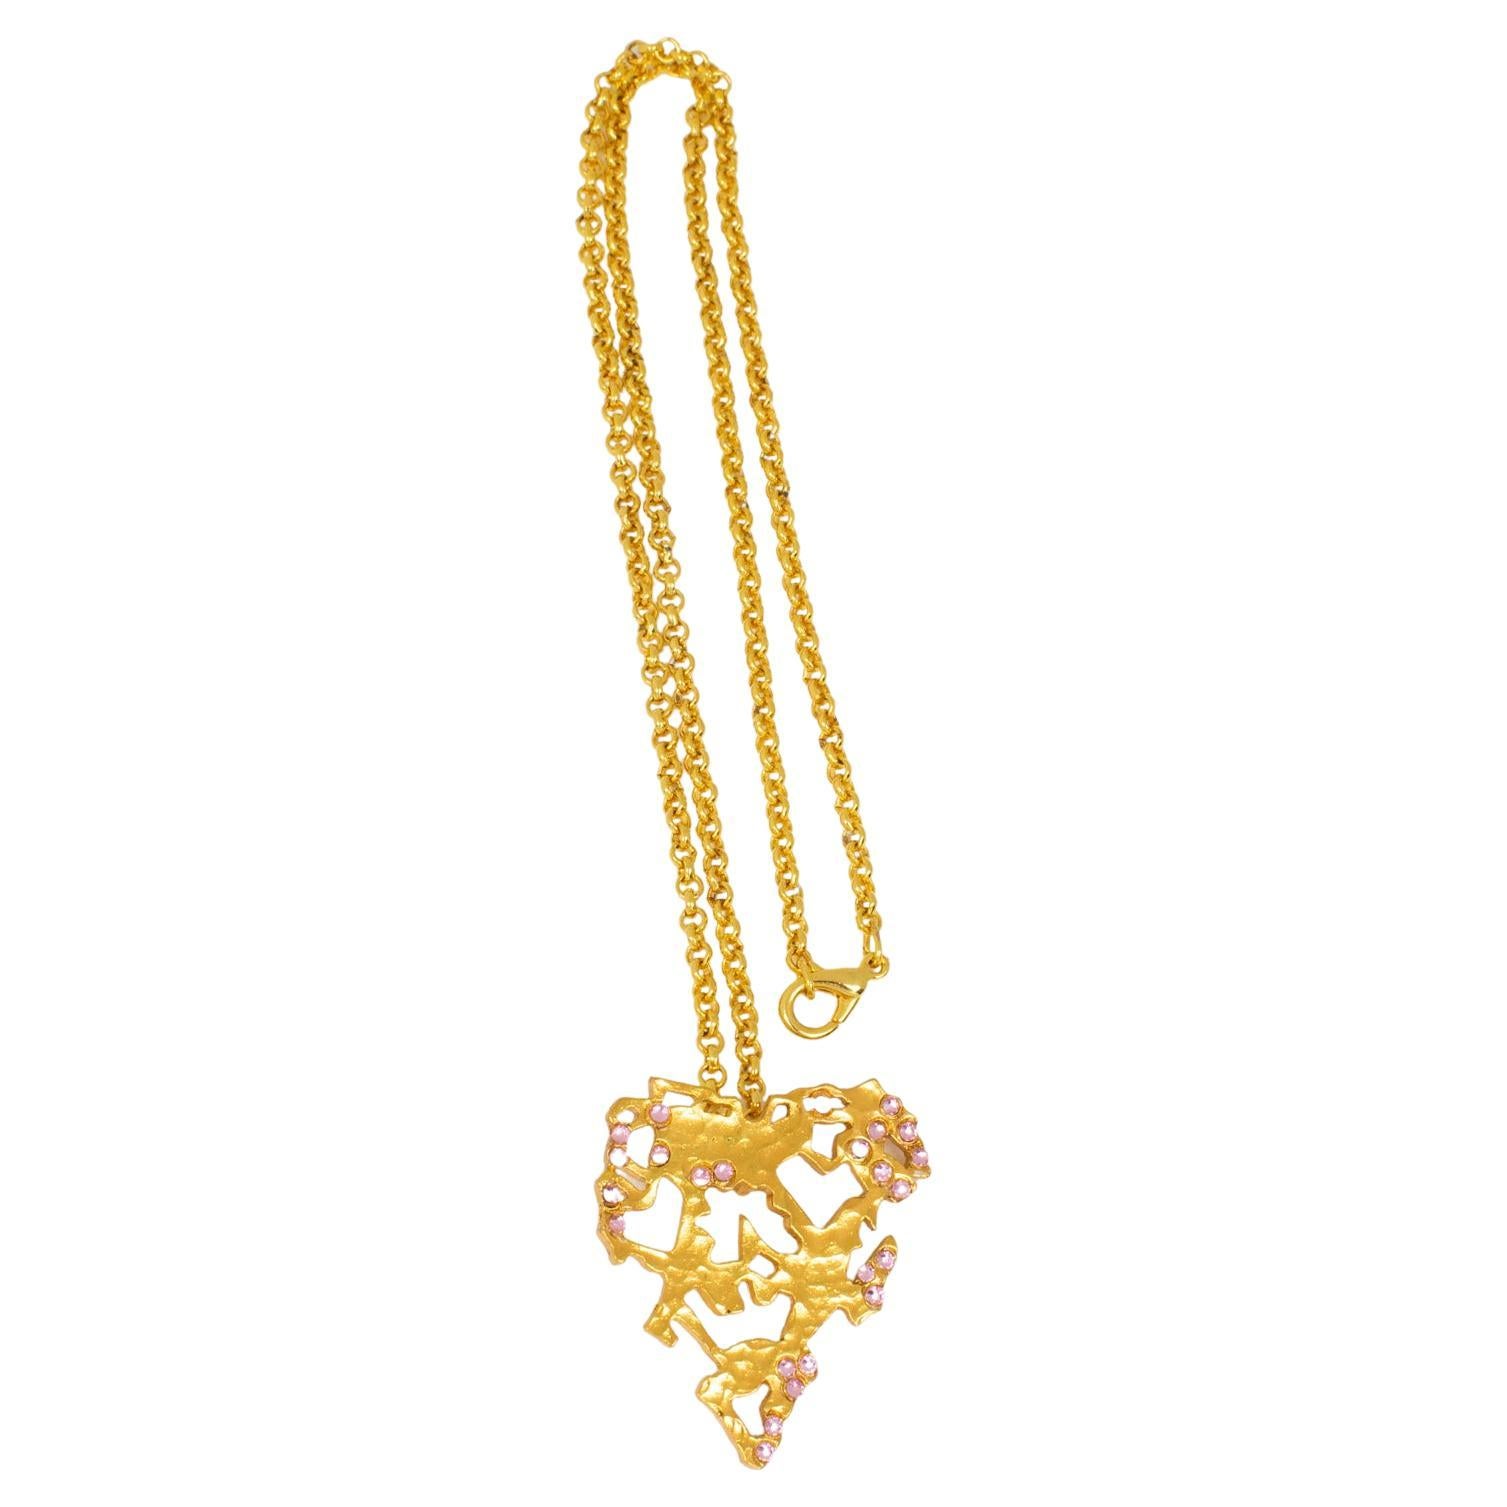 Christian Lacroix Gilt Metal and Pink Jeweled Brutalist Heart Pendant Necklace For Sale